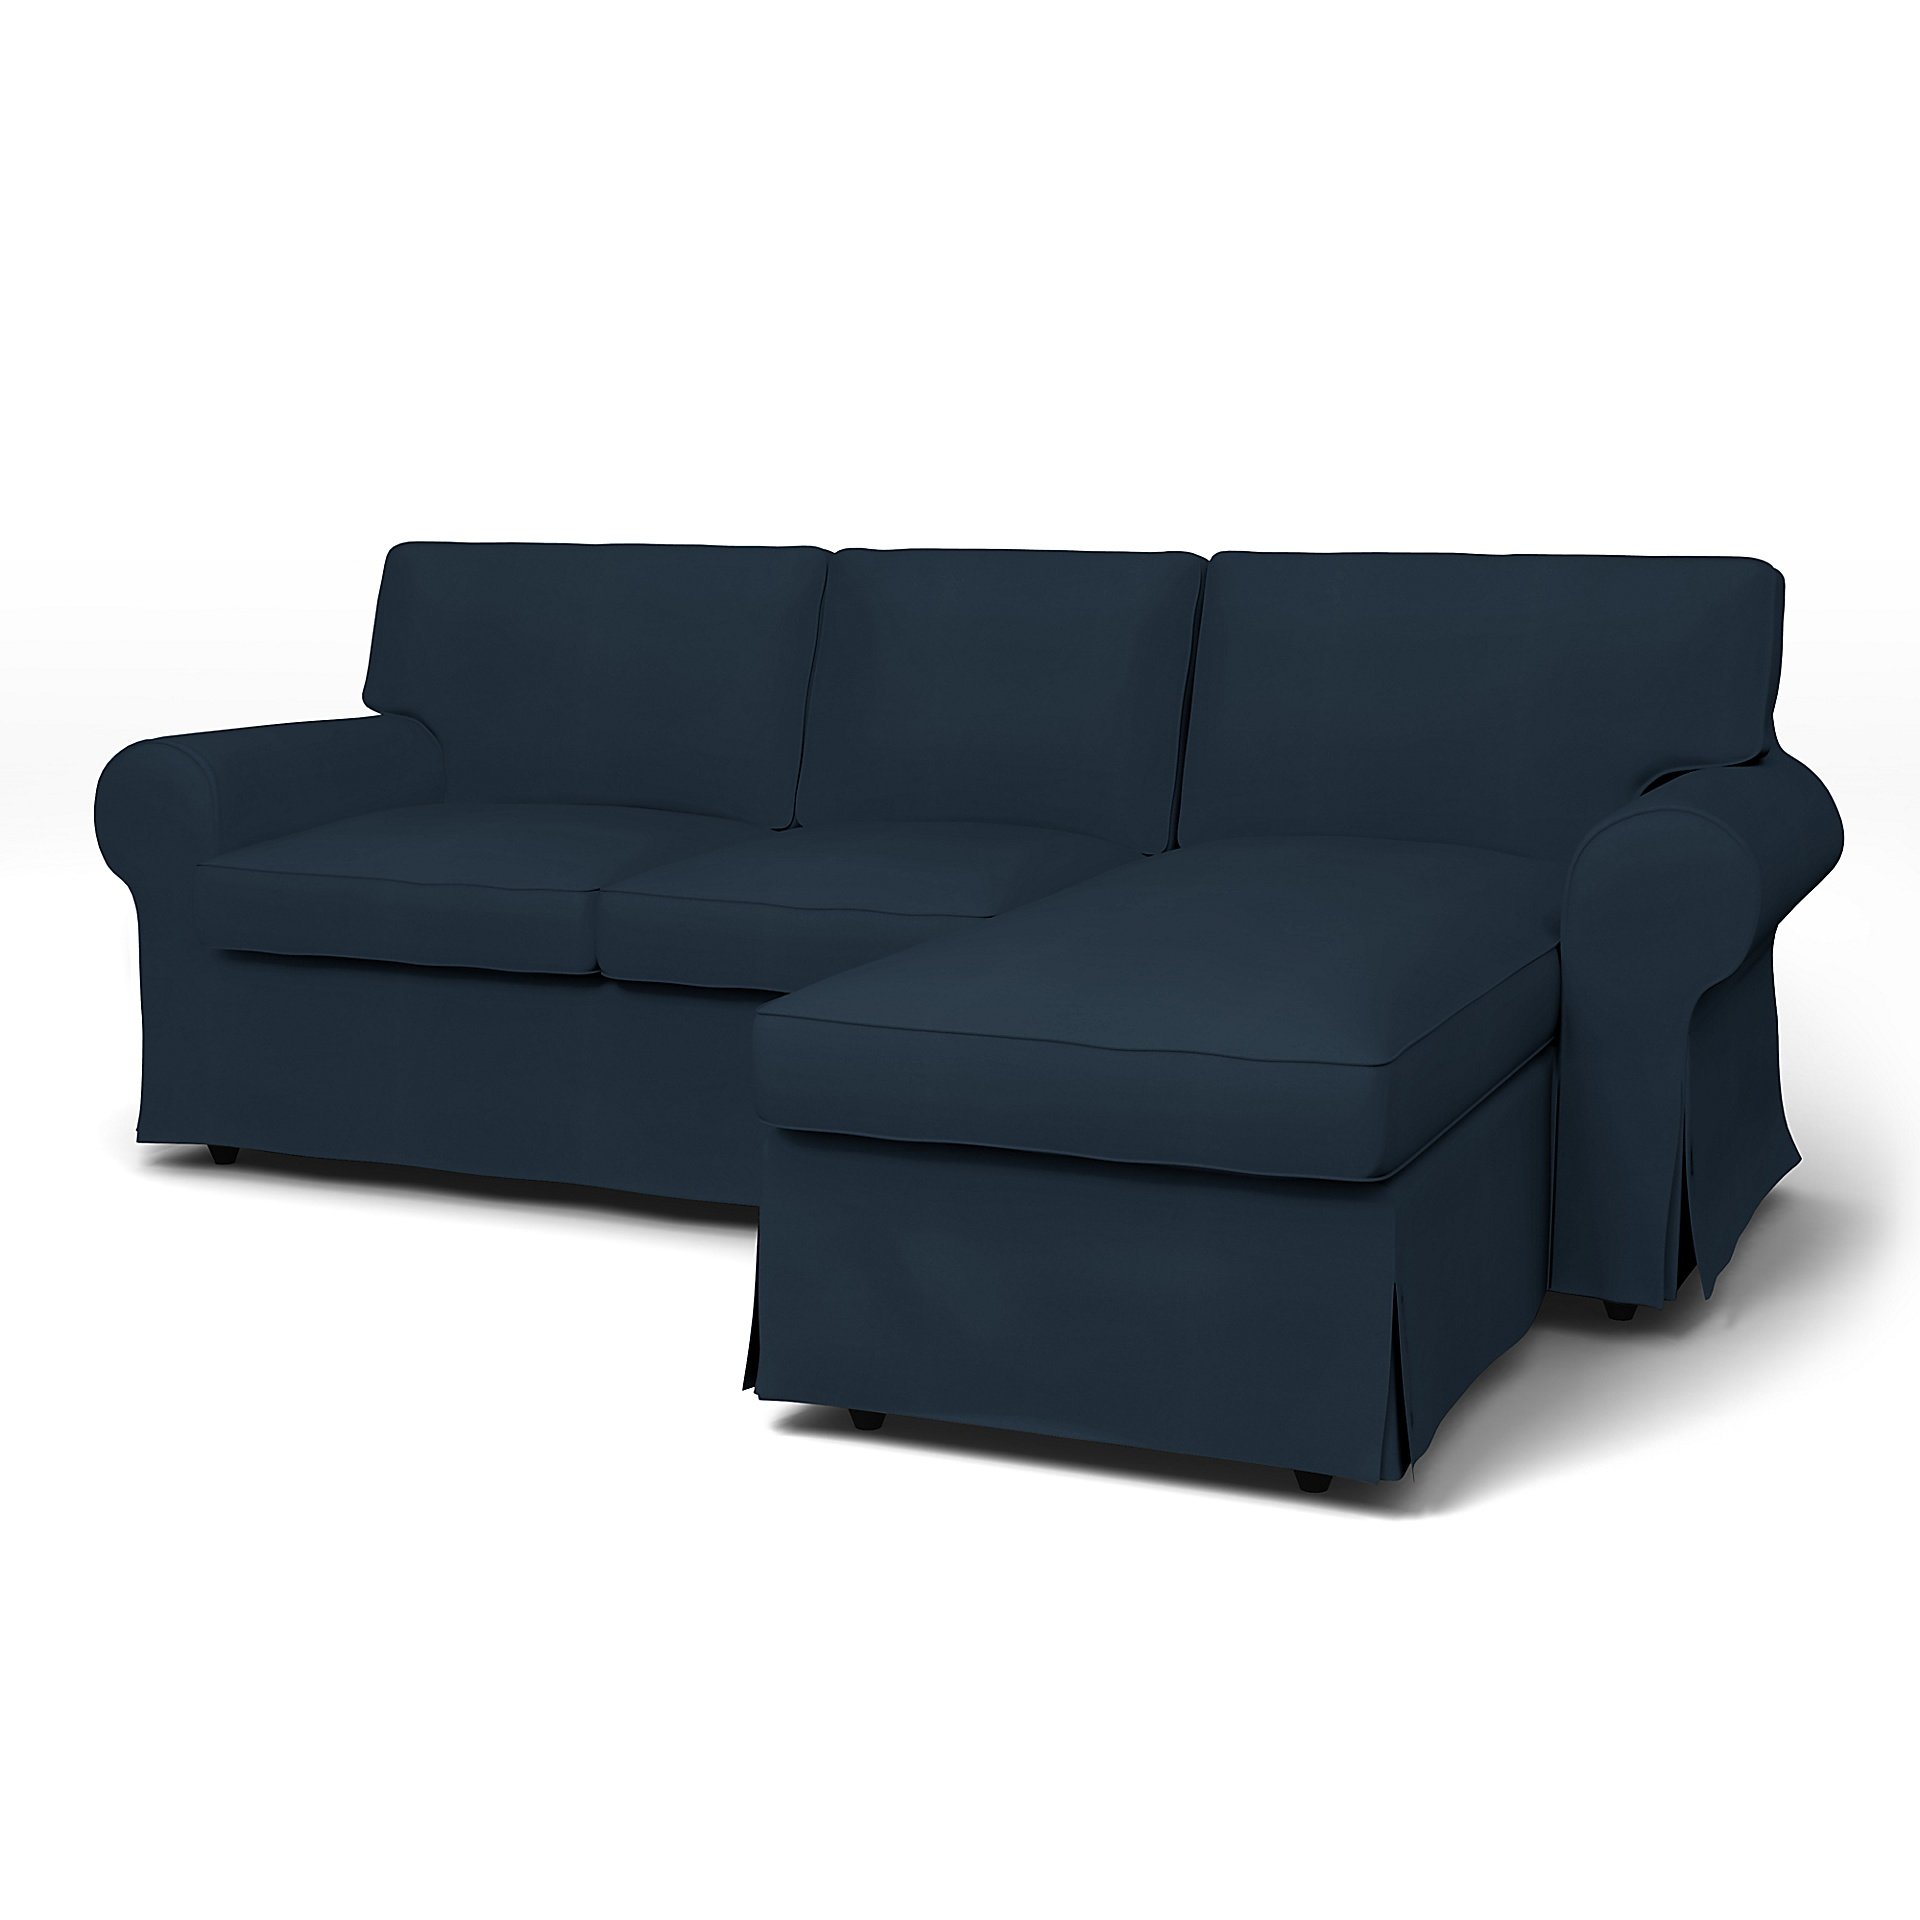 IKEA - Ektorp 3 Seater Sofa with Chaise Cover, Navy Blue, Cotton - Bemz